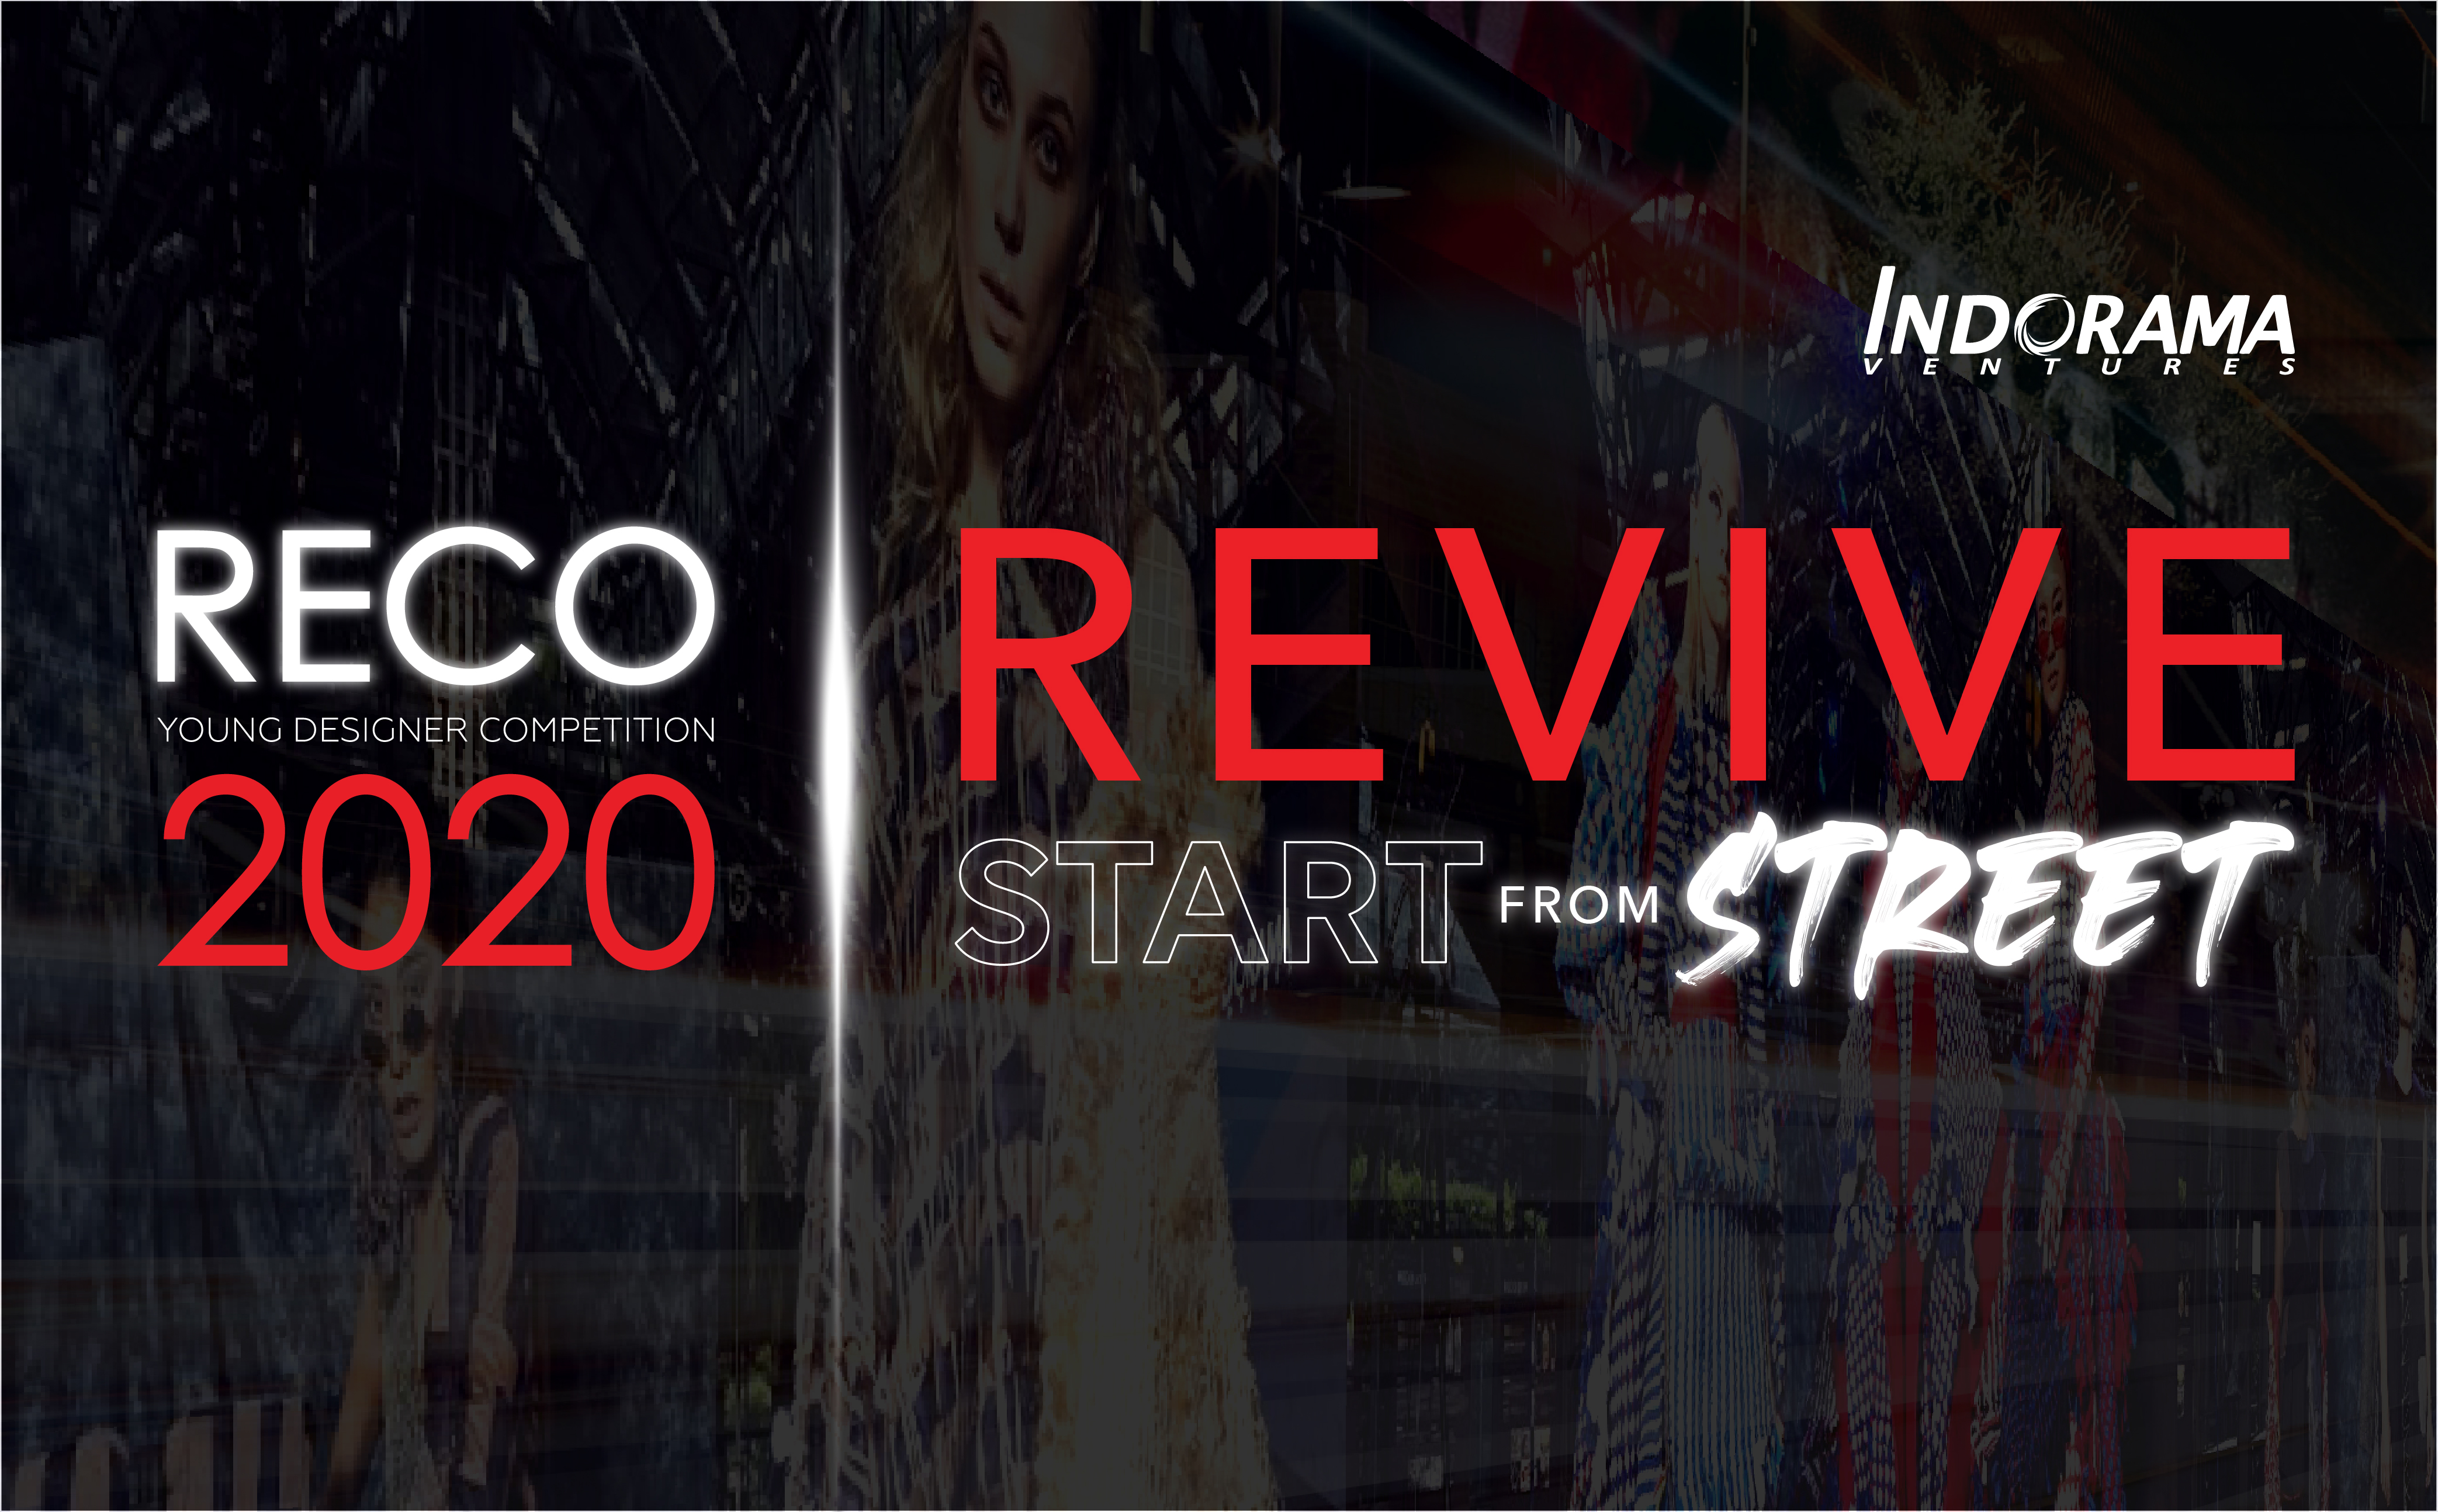 Reco Young Designer Competition 2020